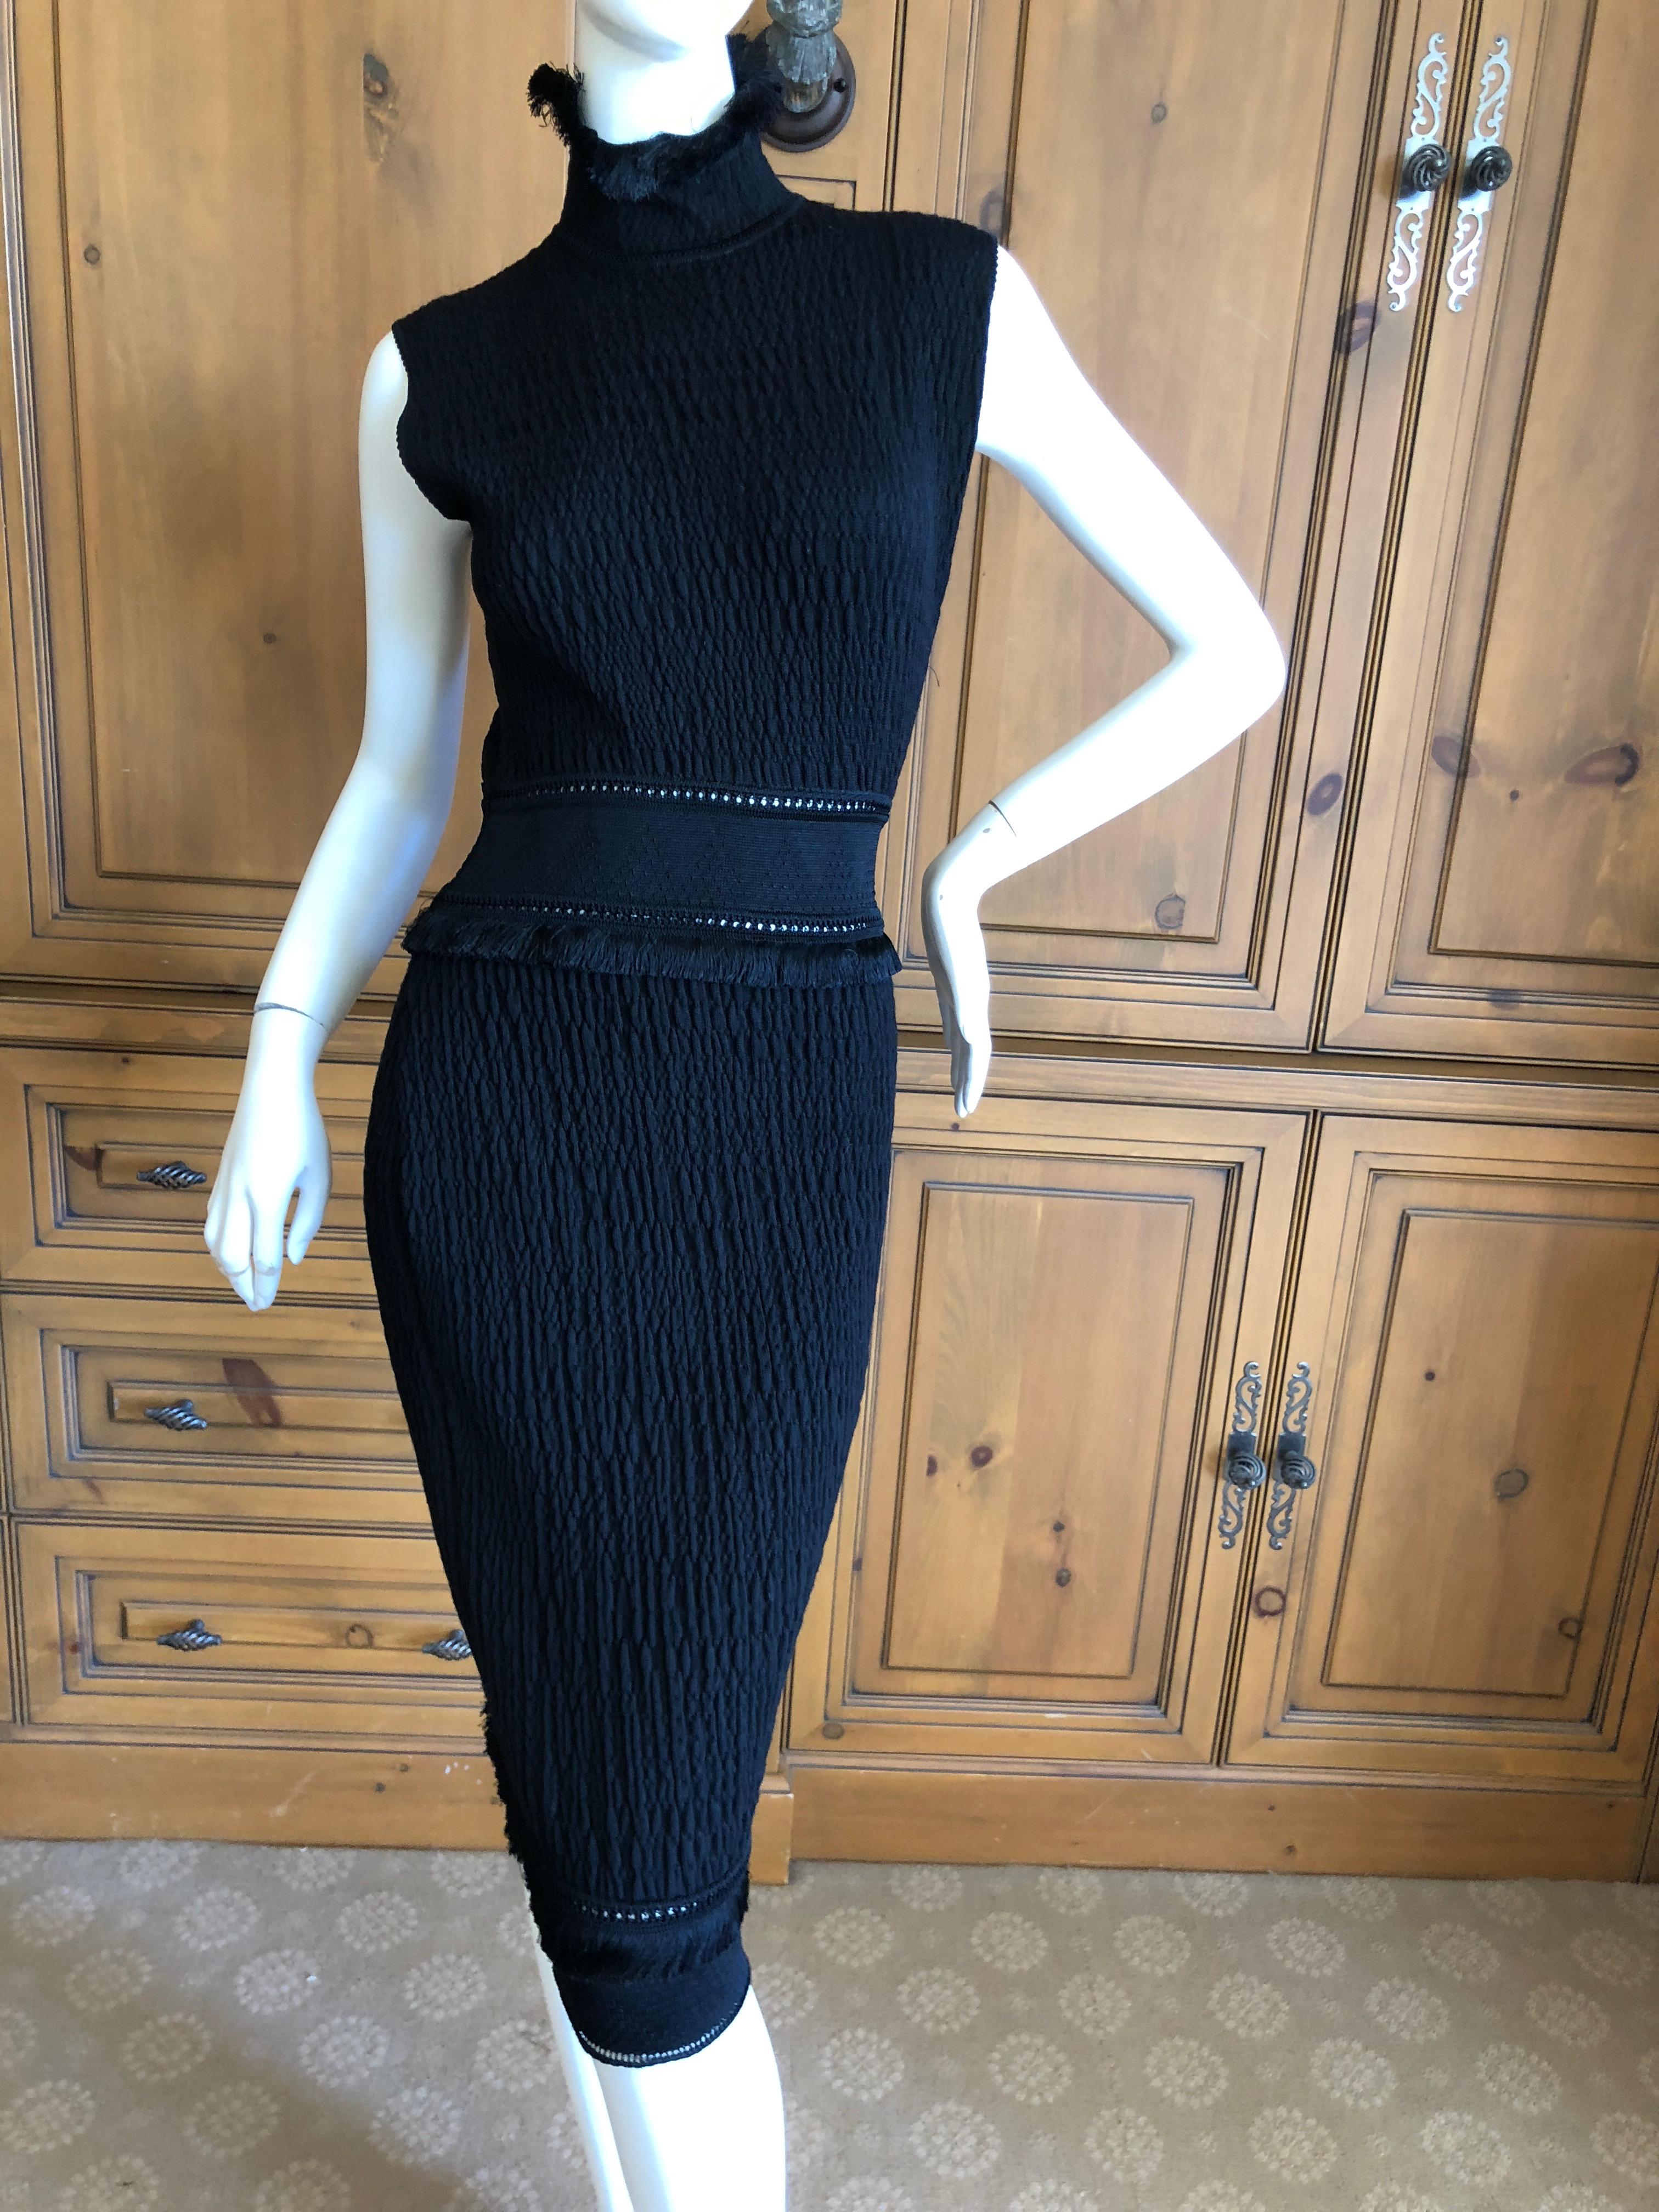 John Galliano 1990's Black Fringed Dress with Matching Wide Mink Collar Sweater .
Early cloth label Galliano, featuring a lovely sleeveless dress with a matching cardigan sweater with a wide mink collar.
Wear together or separately.

Sweater
Bust: